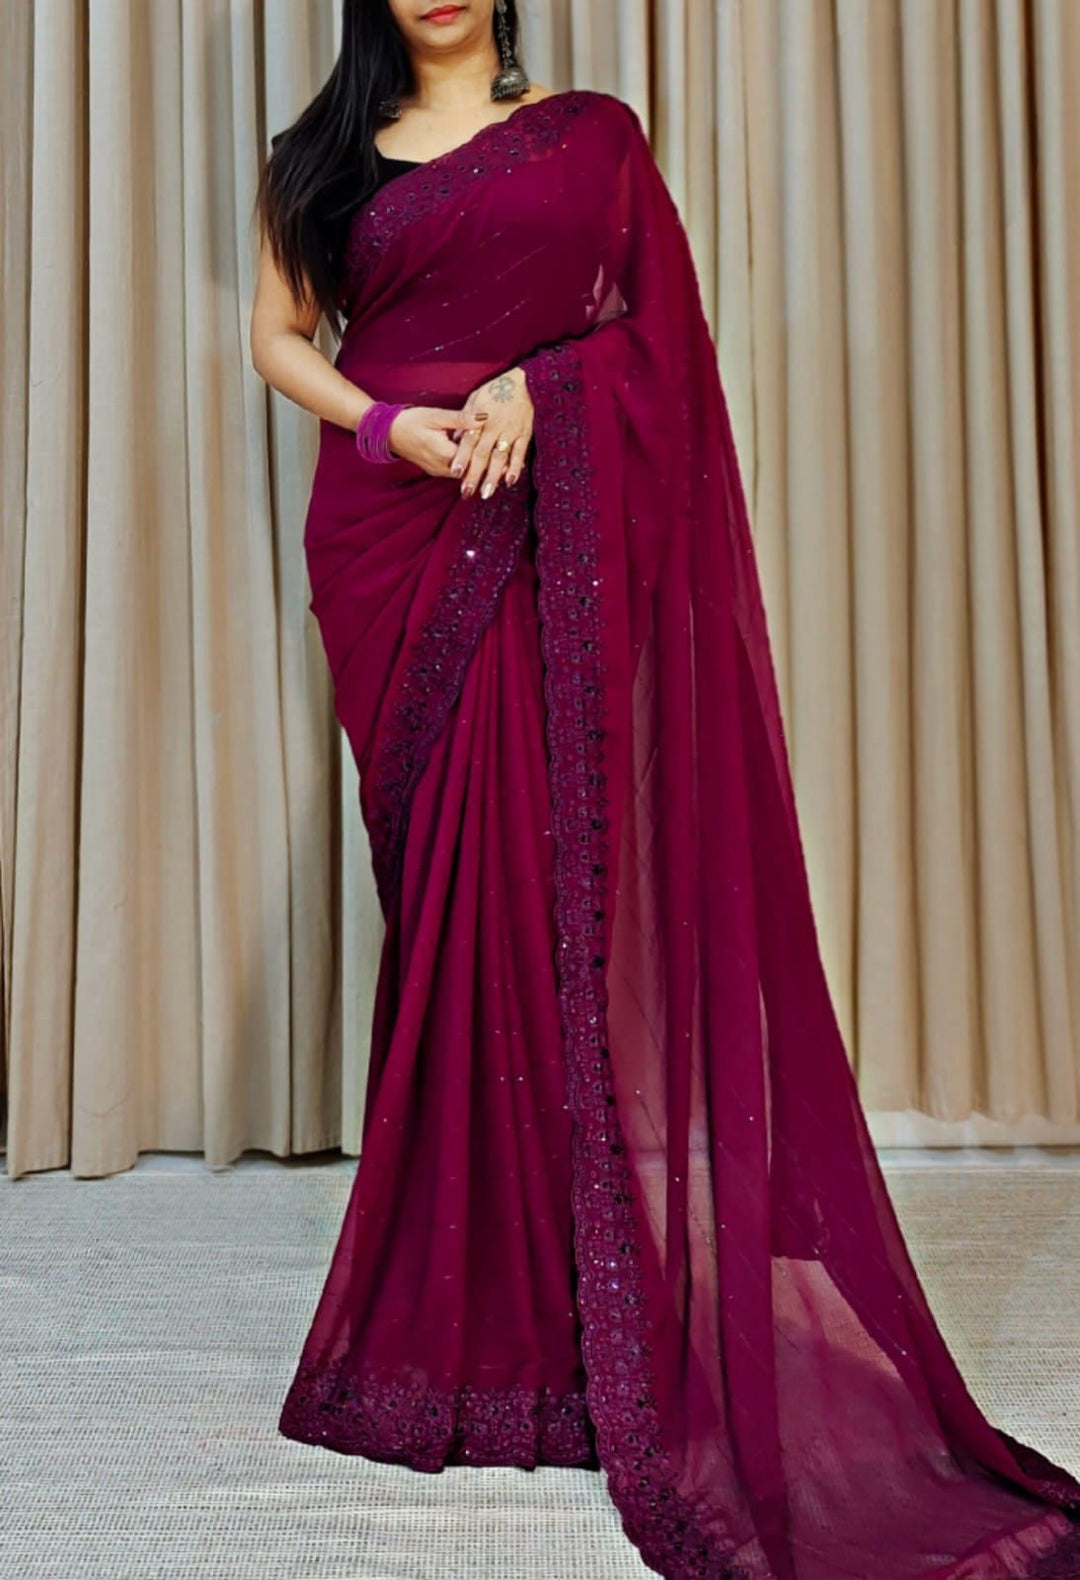 New Bollywood Maroon Colour Designer Soft Georgette Bridal Saree With Blouse Unique Ready To Wear Collection